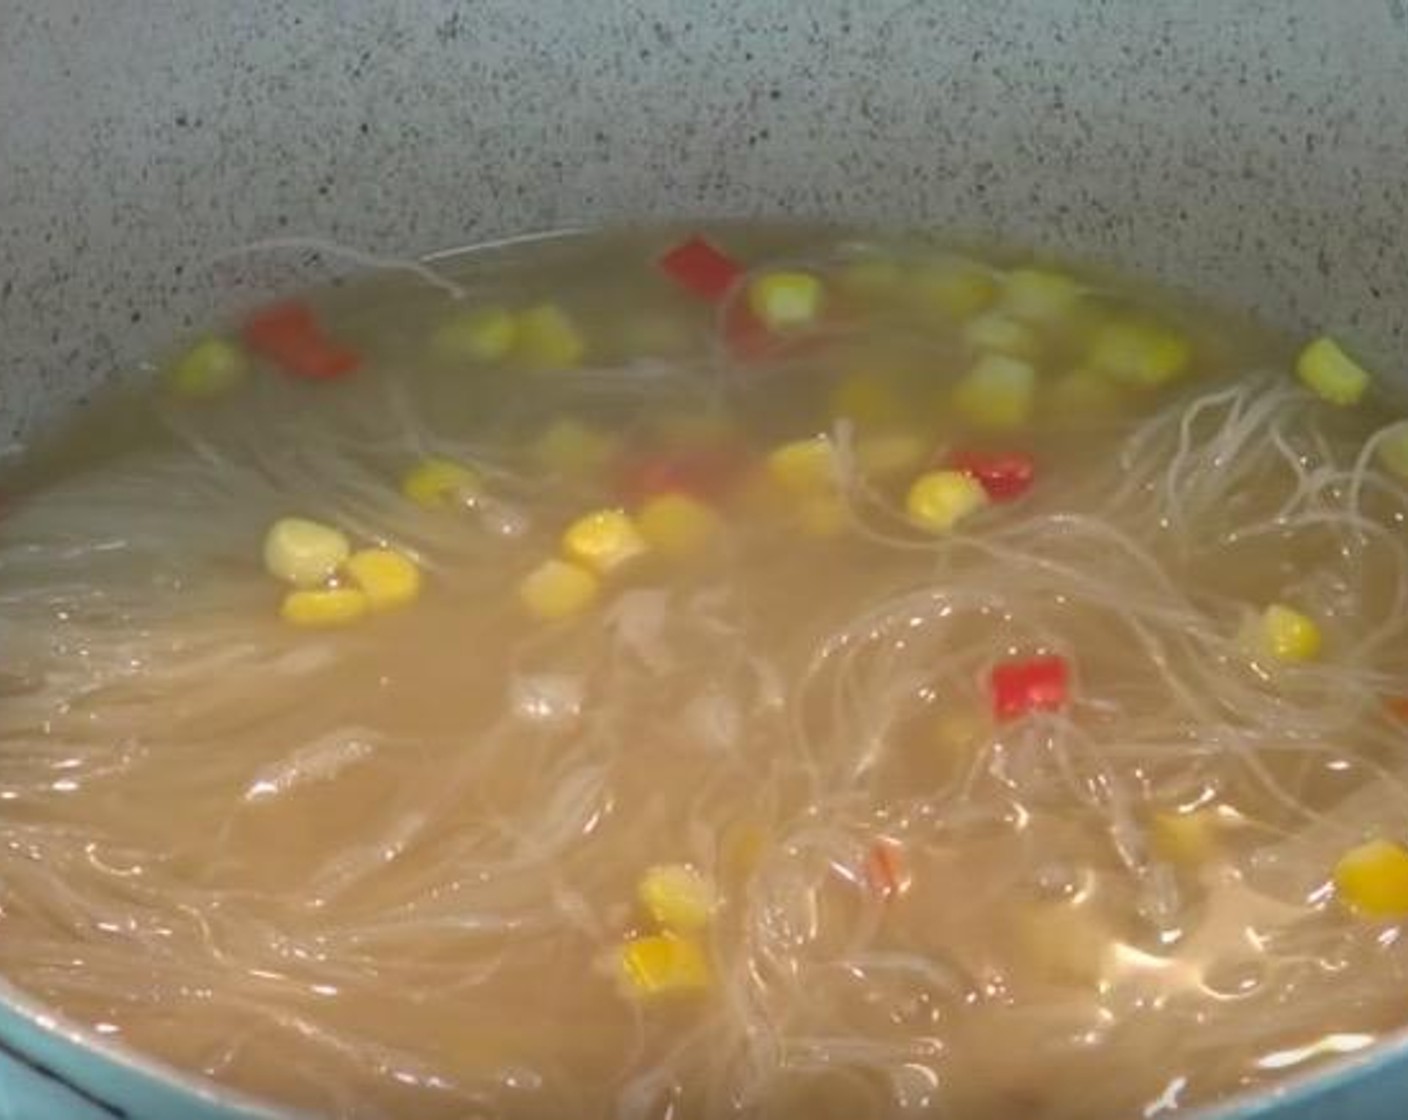 step 1 Add Chicken Stock (4 cups), Water (1 cup), Fresh Ginger (1 tsp), Garlic (1 clove), and Red Chili Pepper (1), into a big pot and turn it to medium heat. Next add some Corn Kernels (2 1/4 cups), Rice Noodles (9 oz). Cook it for 1 minute or until it boils. Then add Chicken Breasts (2), Scallion (1 bunch) and mix everything up. Cook for another 2 minutes.